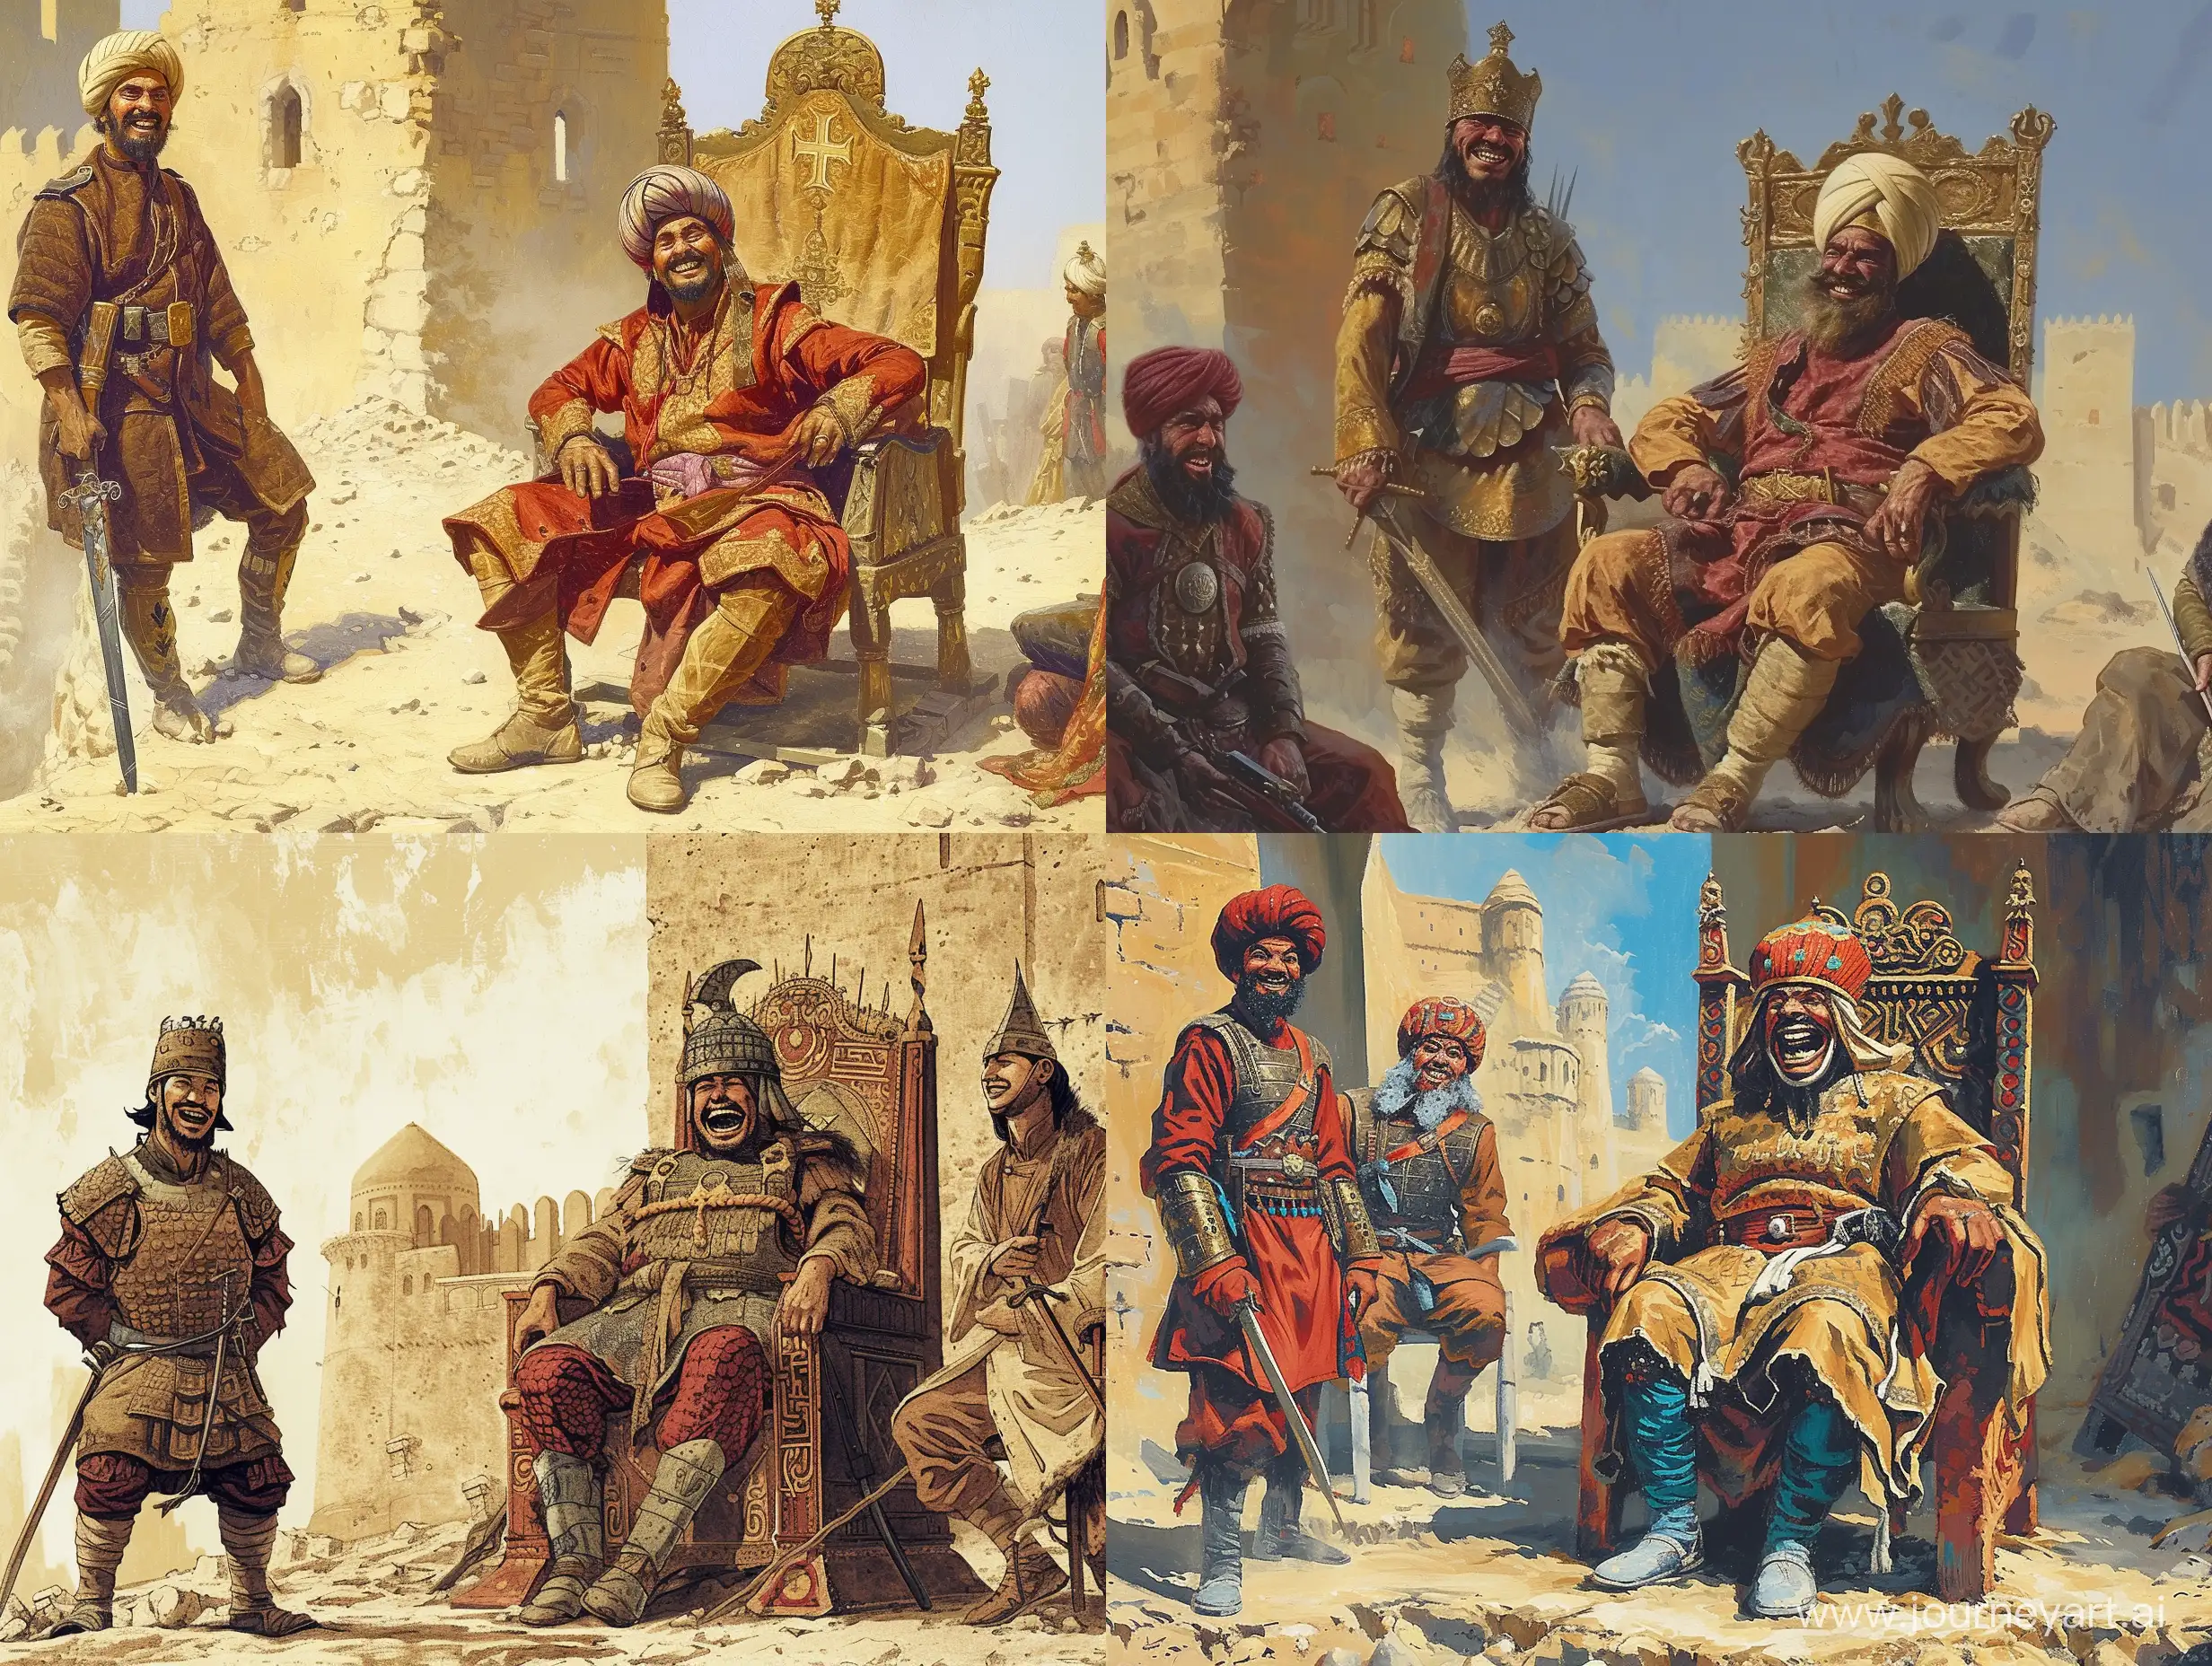 After occupying the Persian castle, the Arab soldier sits down on the throne of the Persian Empire in the Bam citadel with a frightening smile, while a smiling Mongol soldier stands next to the chair on the left.